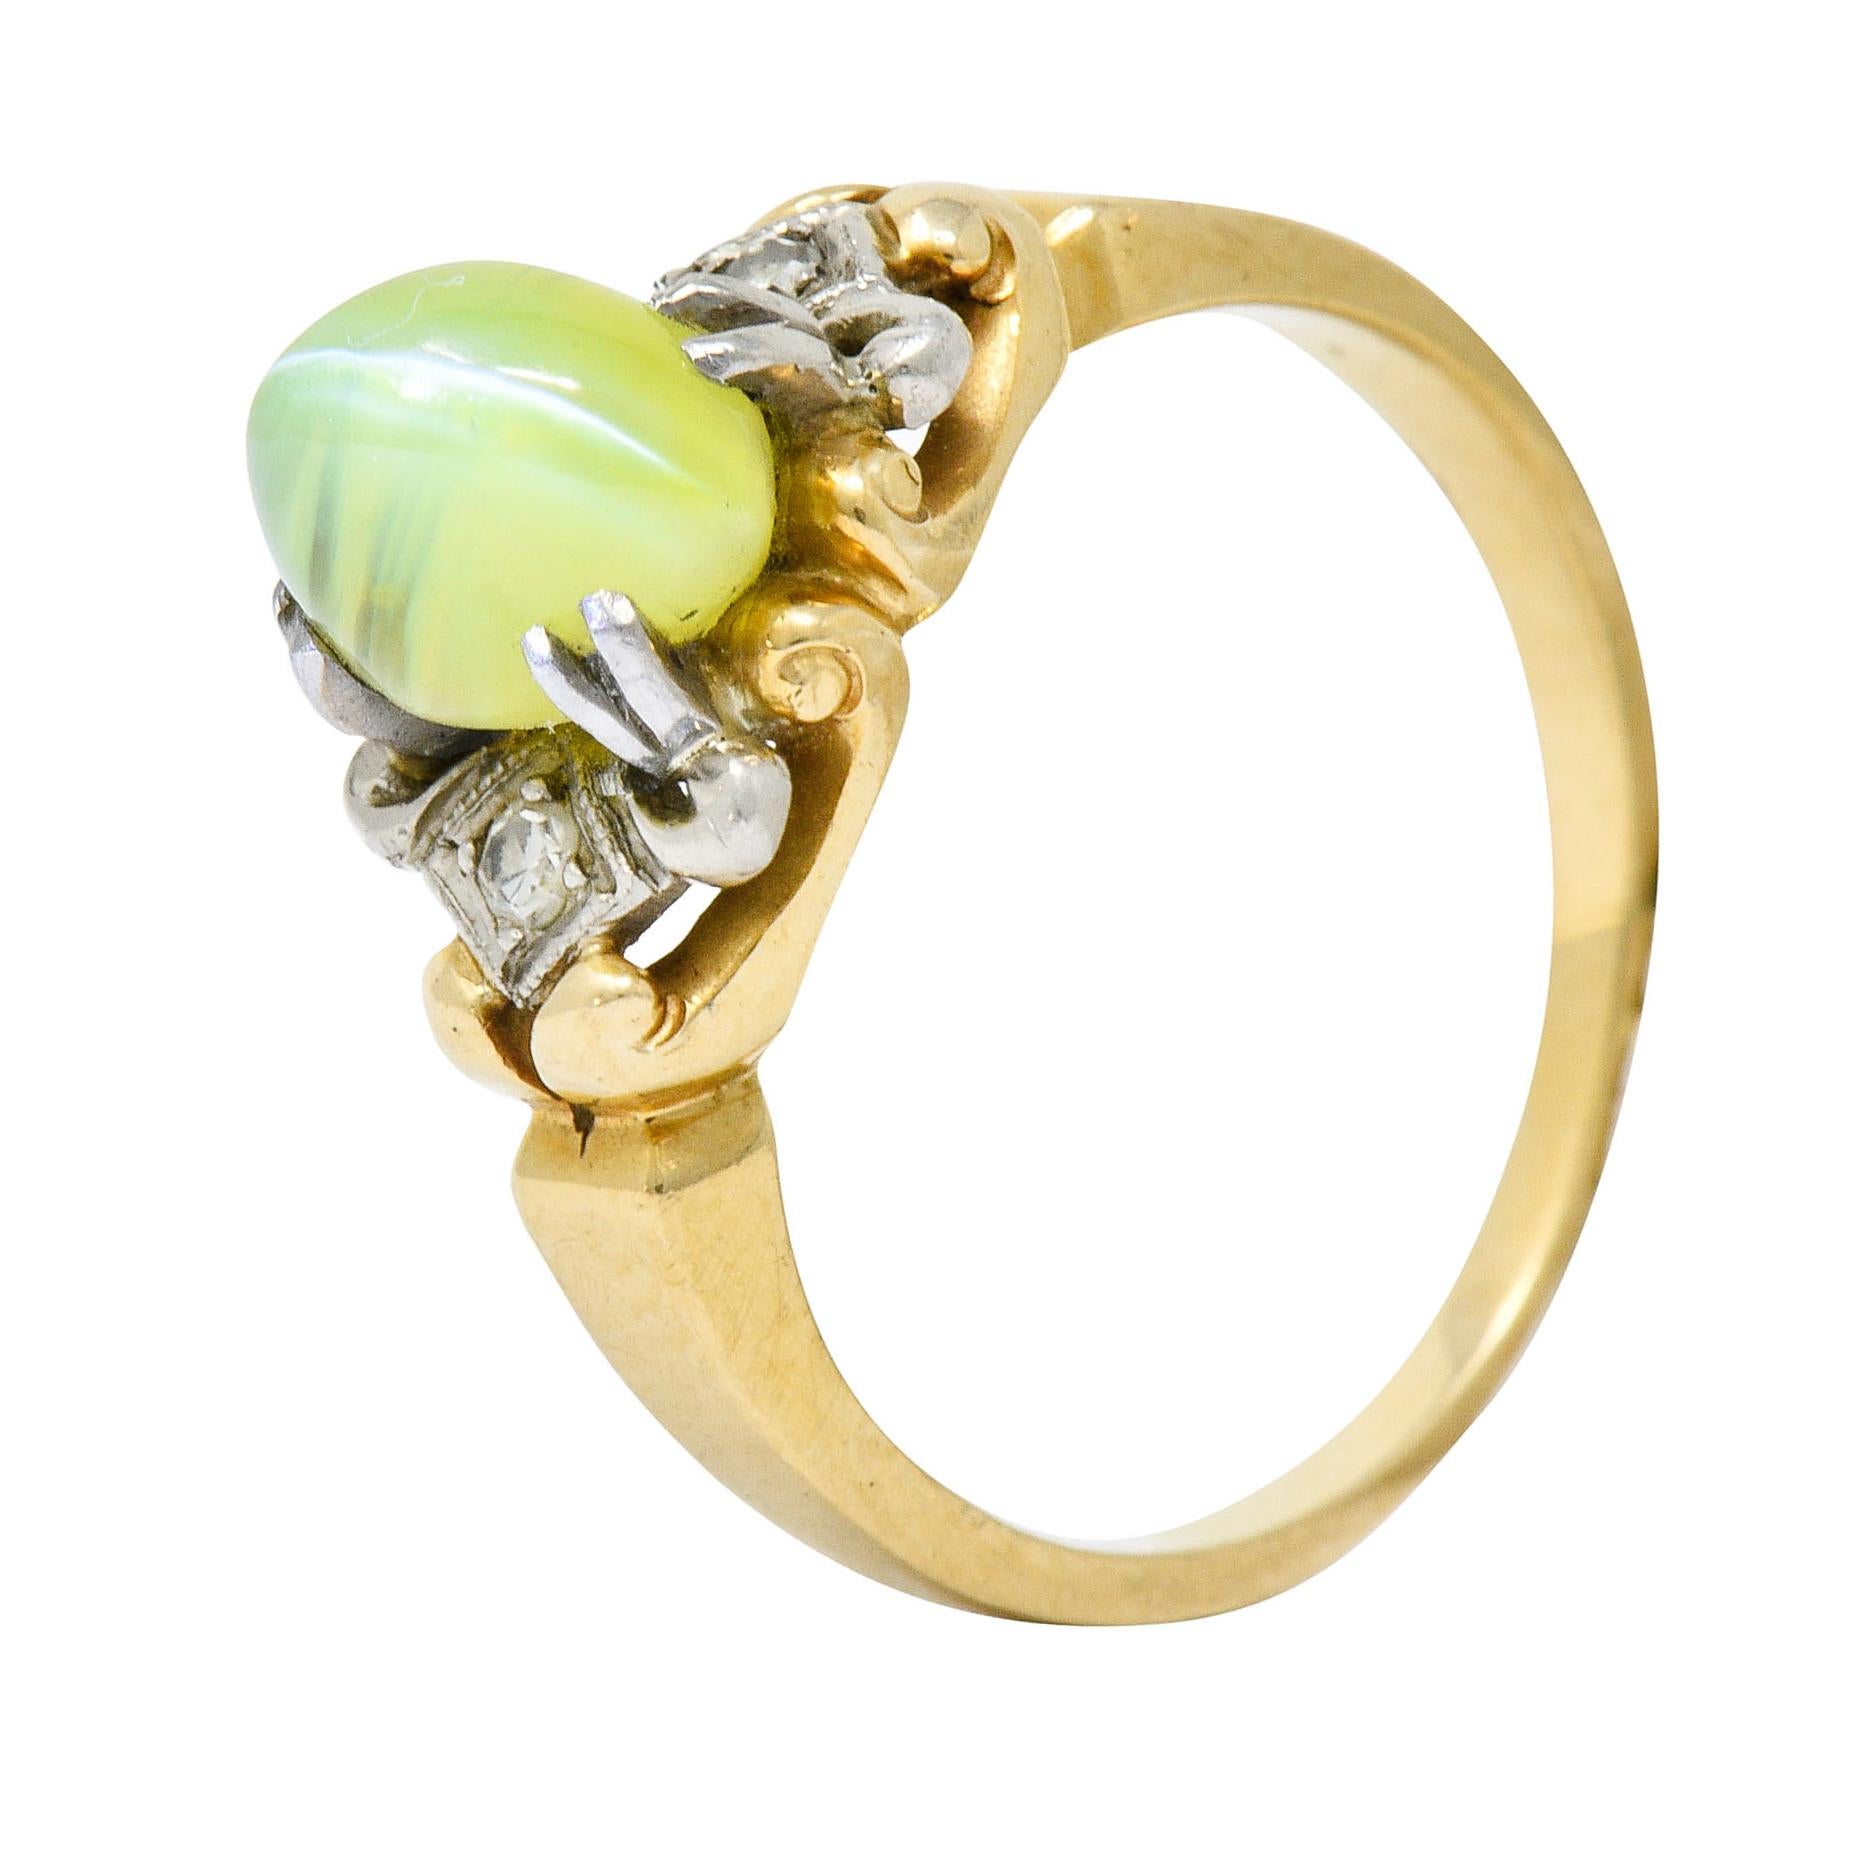 Centering a highly domed cat's eye chrysoberyl cabochon measuring approximately 7.8 x 6.0 mm

Translucent yellowish-green in color with a sharp white eye

Claw set with stylized split platinum prongs and flanked by platinum navette forms

Accented